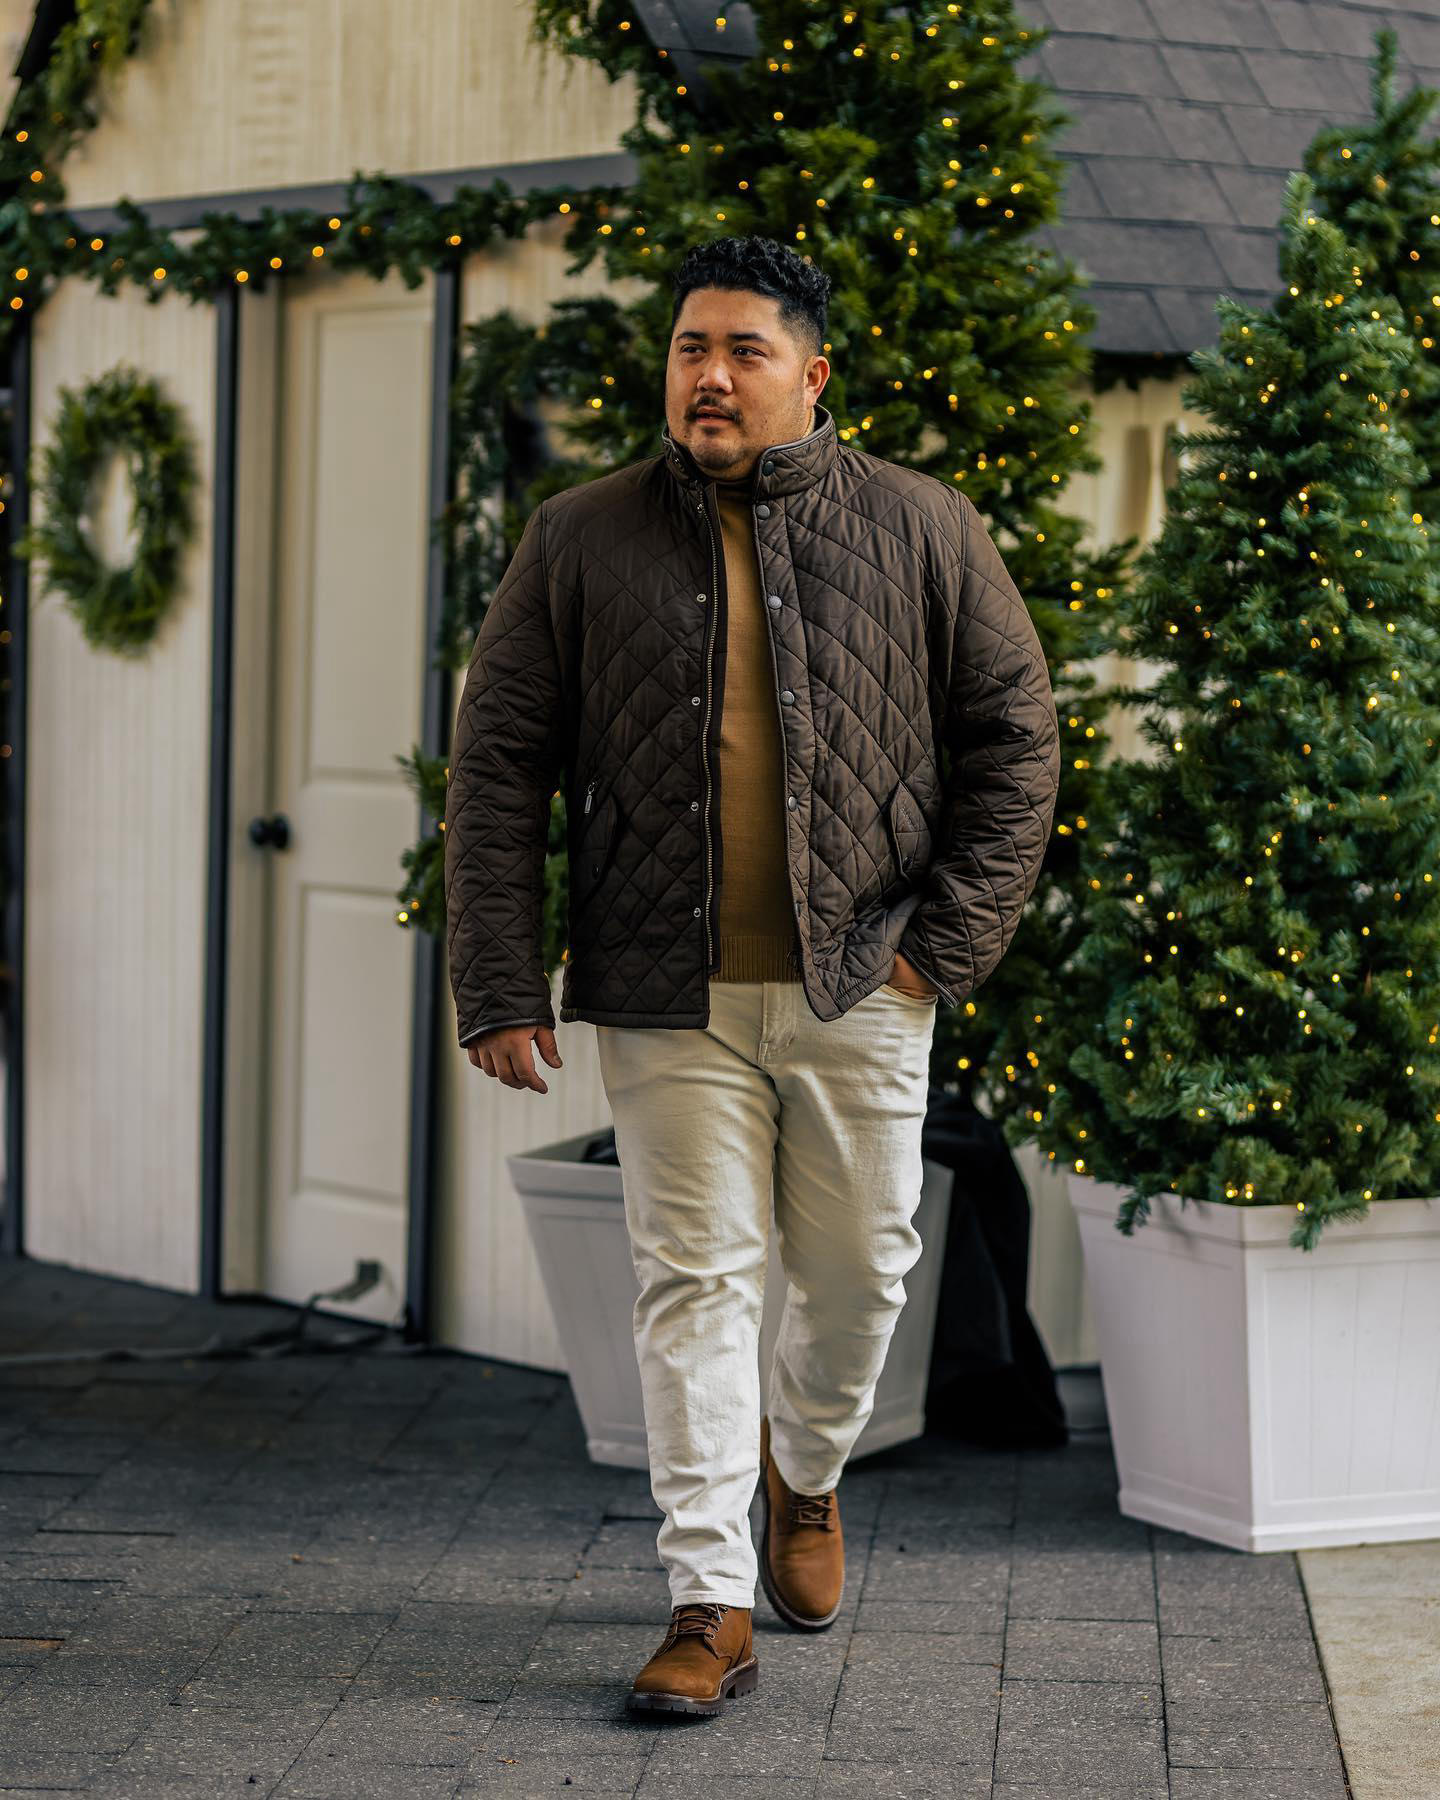 Nick Urteaga - Yes, white denim in the winter is very much a thing